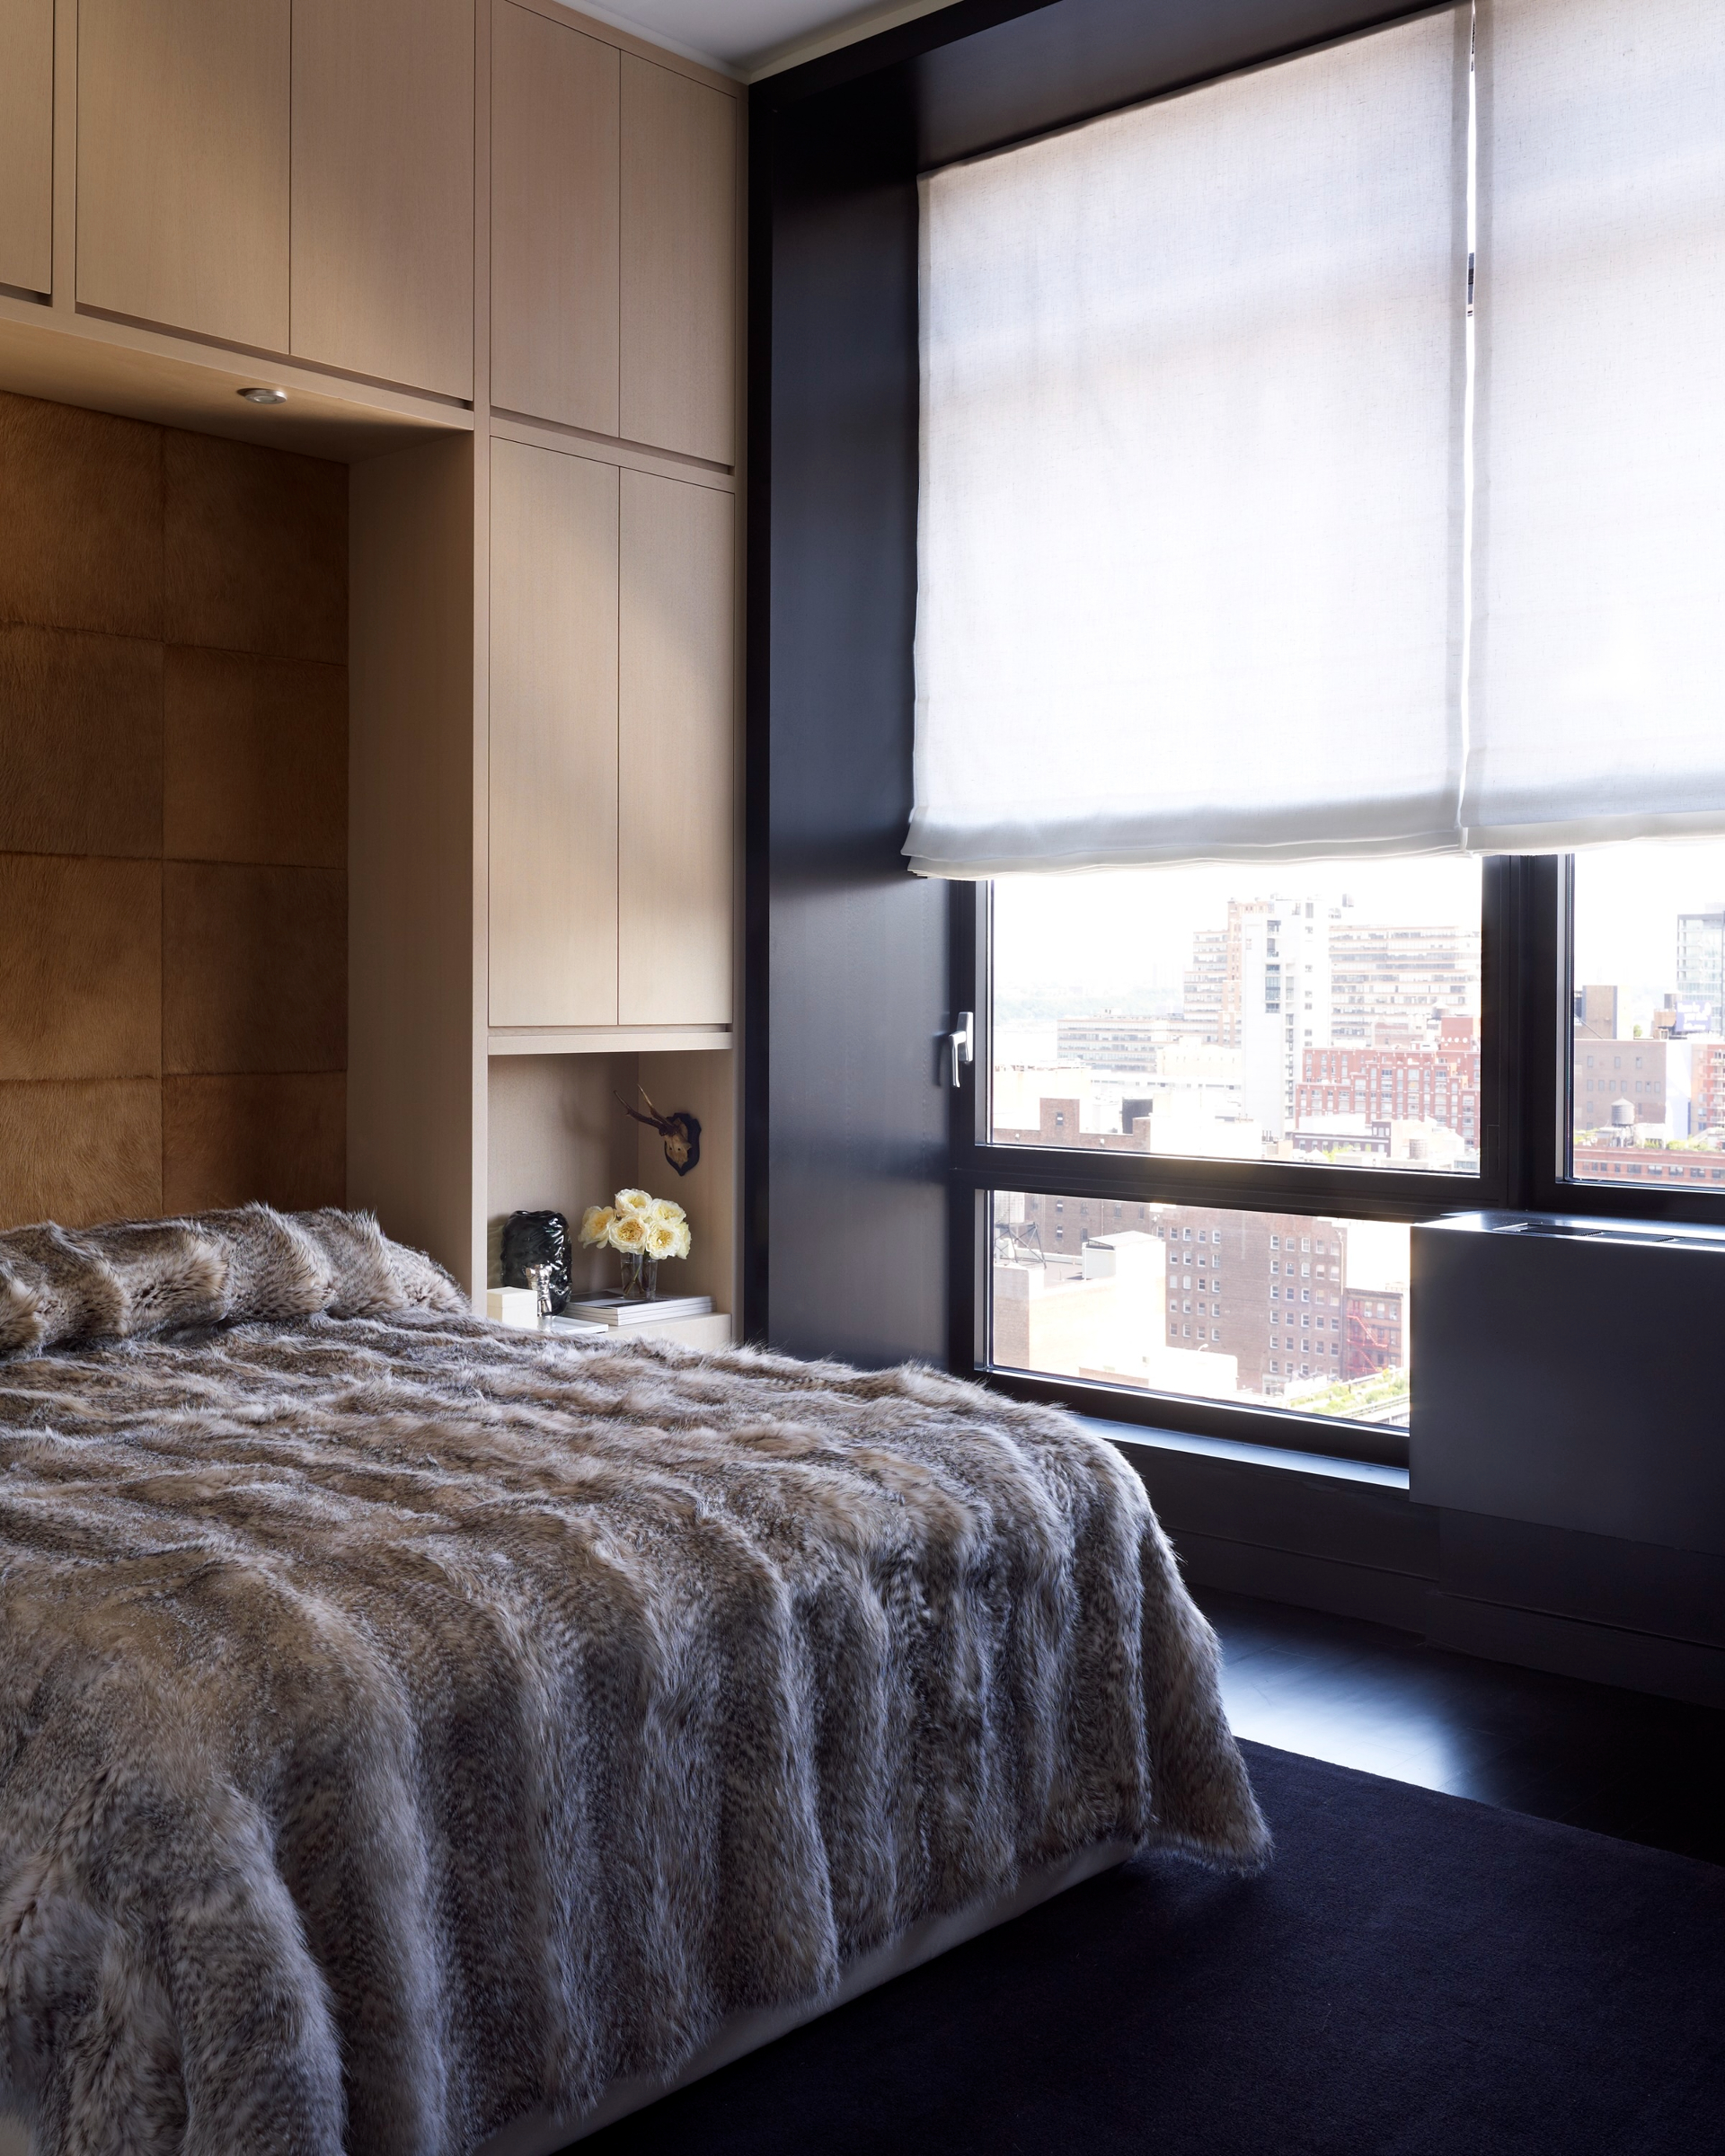 Luxurious contemporary apartment with a fur bedspread and a large window with a city view as well as chic wood panelling